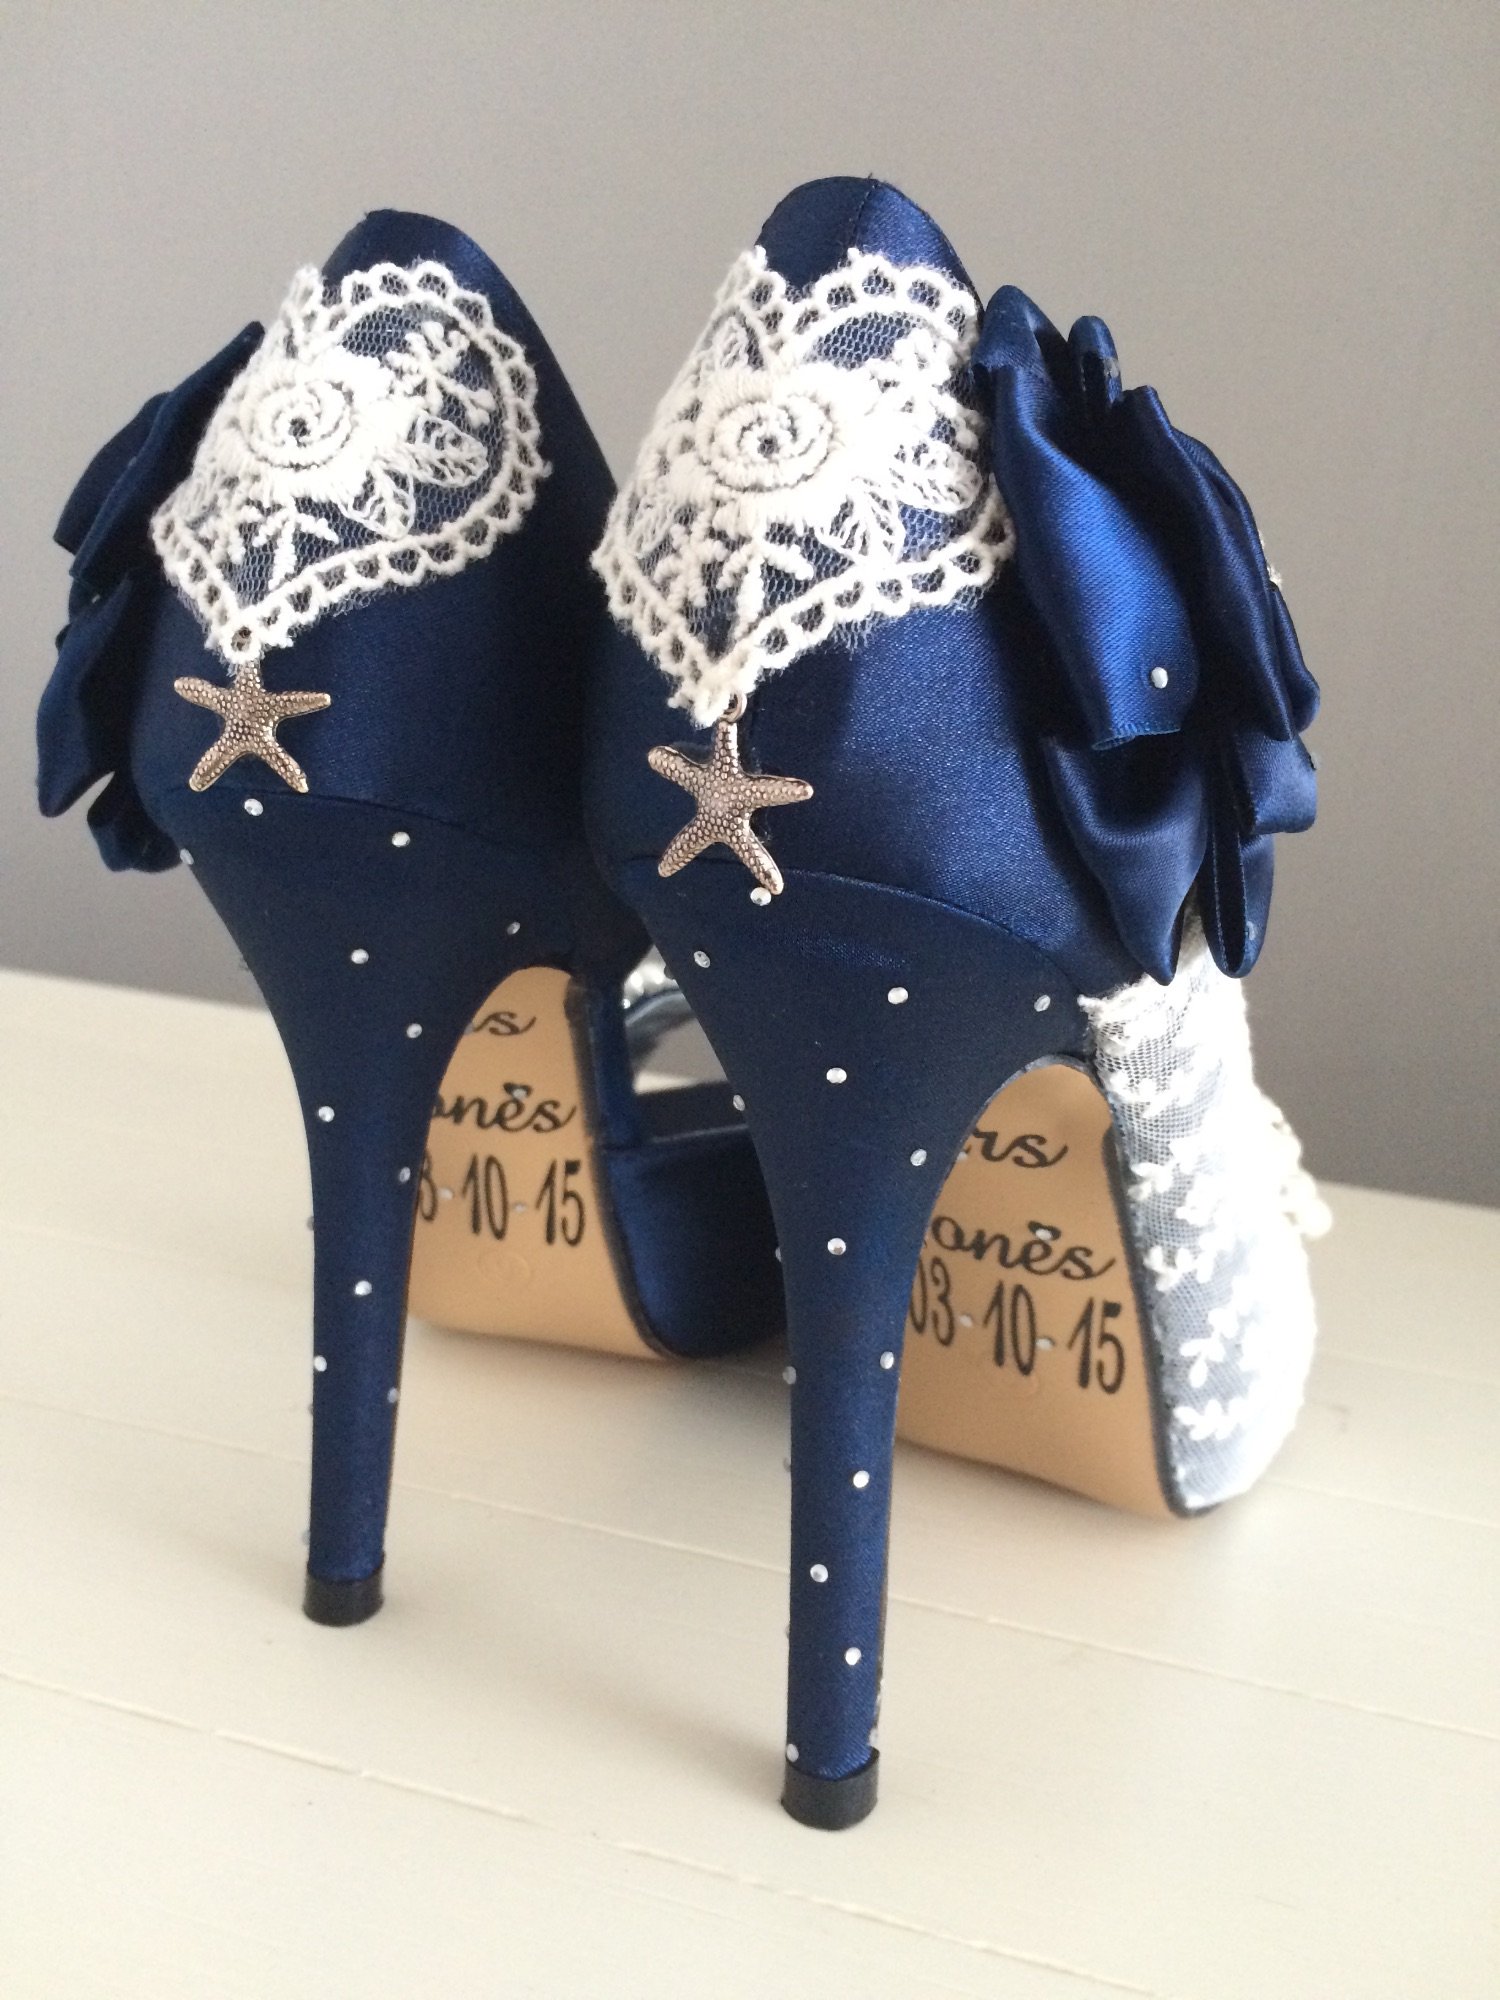 Blue lace wedding shoes. Customised shoes by Lace and Love